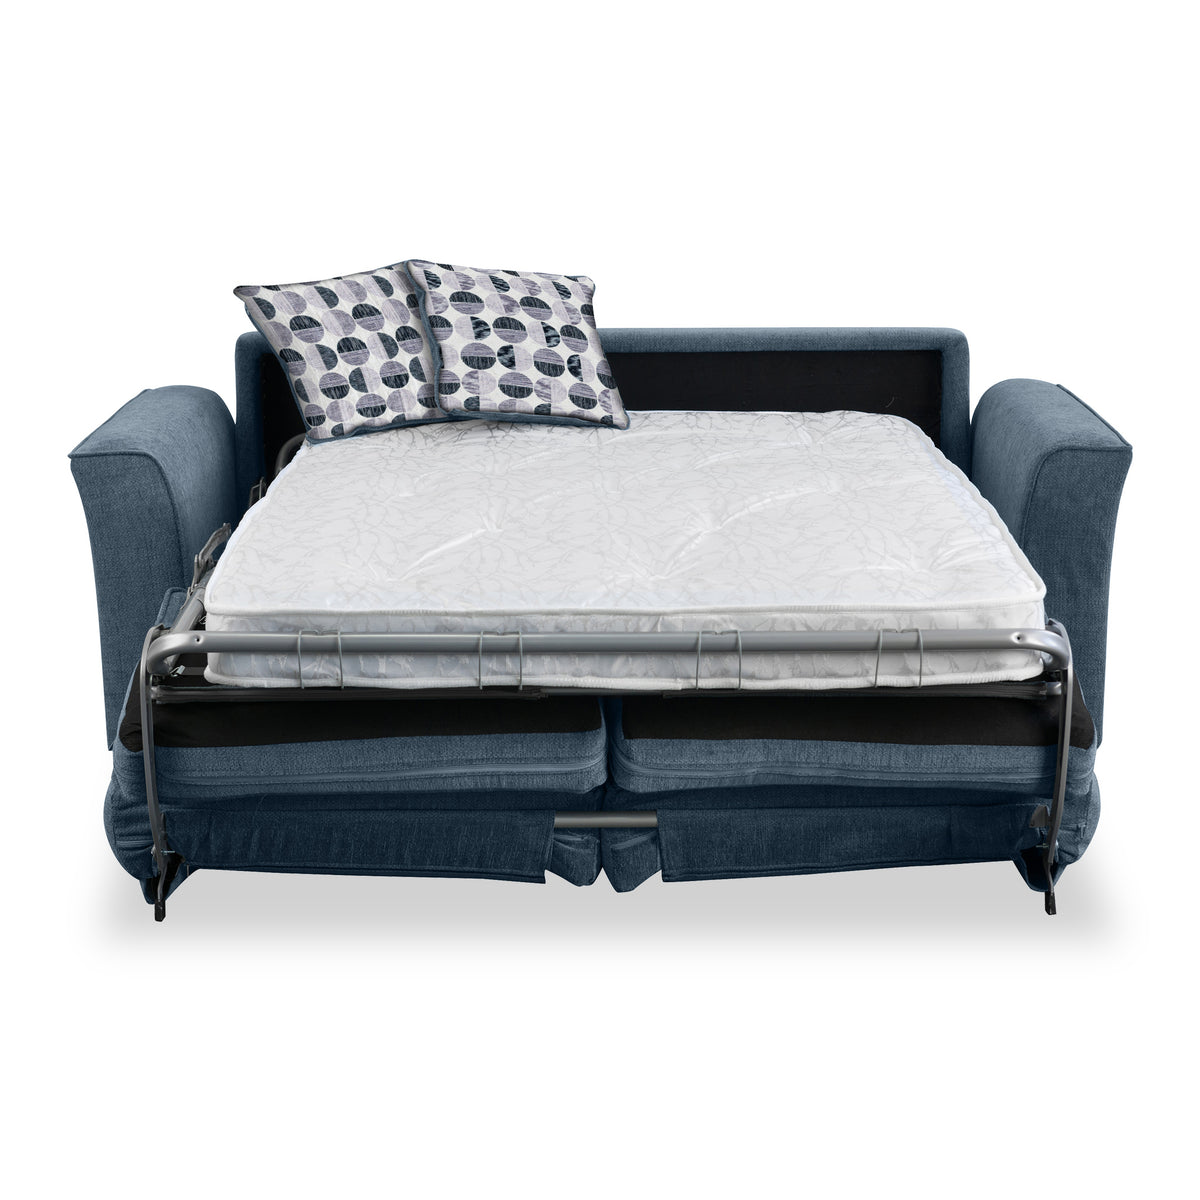 Boston 2 Seater Sofabed in Midnight with Rufus Mono Cushions by Roseland Furniture